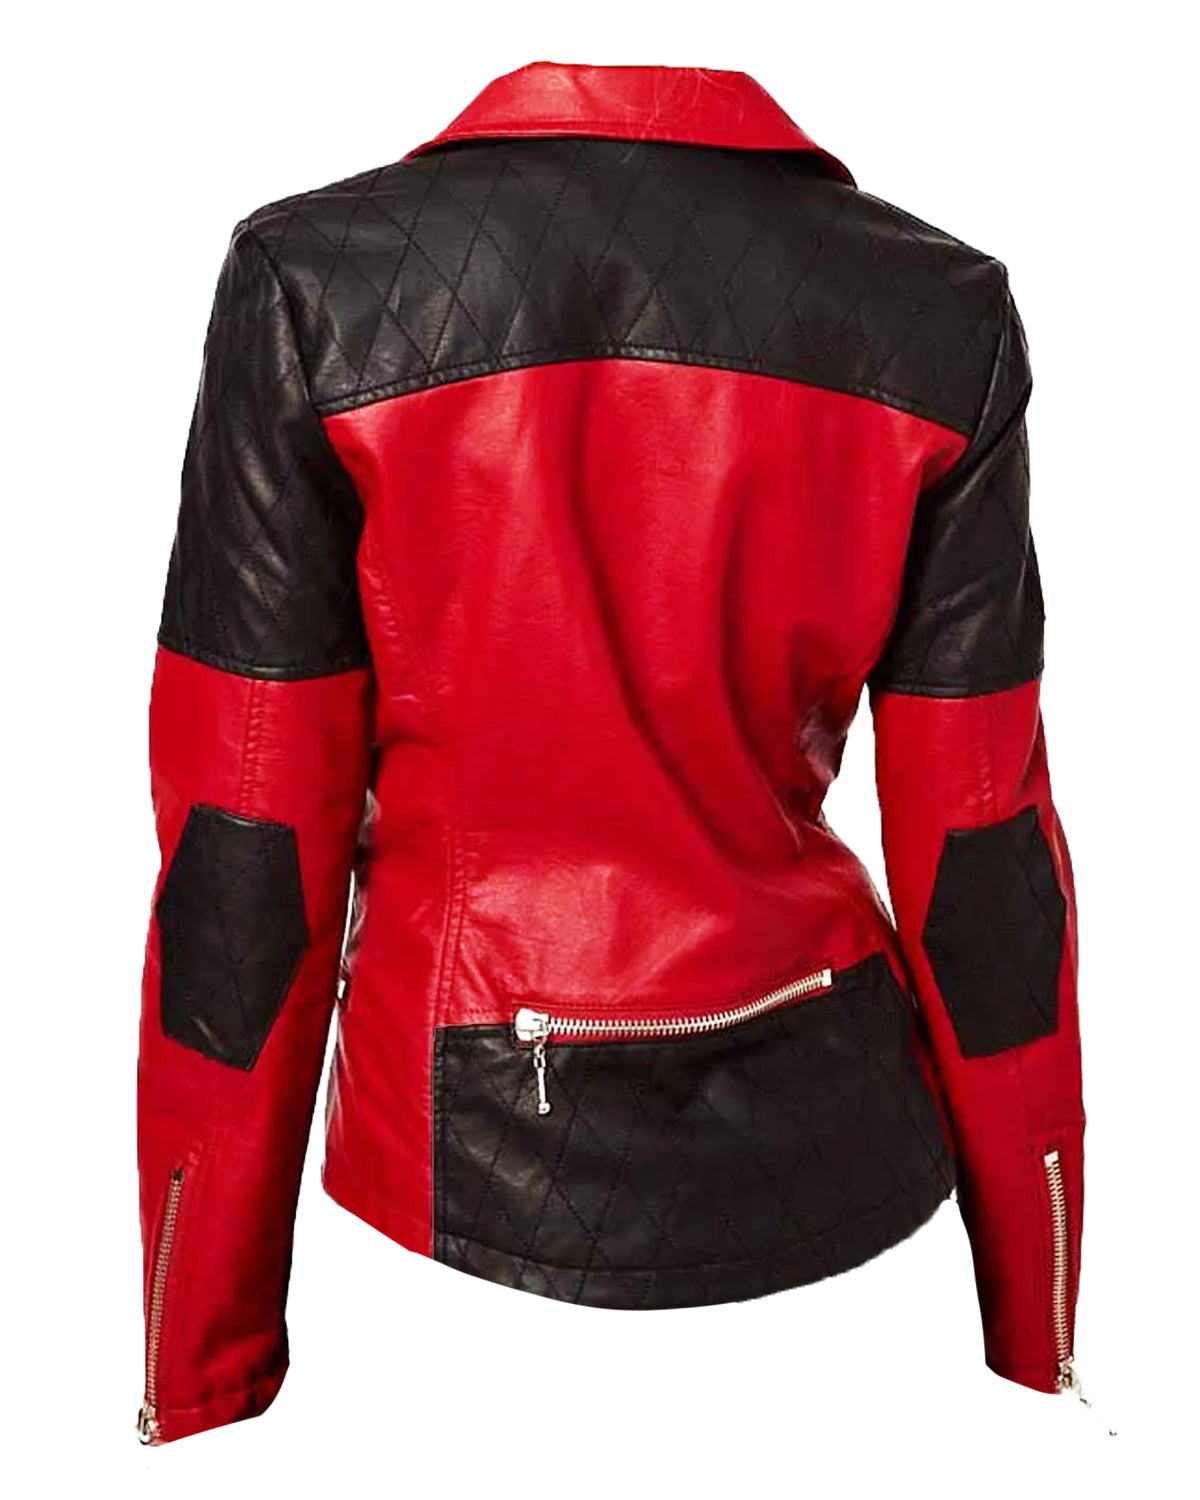 Women’s Asymmetrical Biker Red and Black Leather Jacket